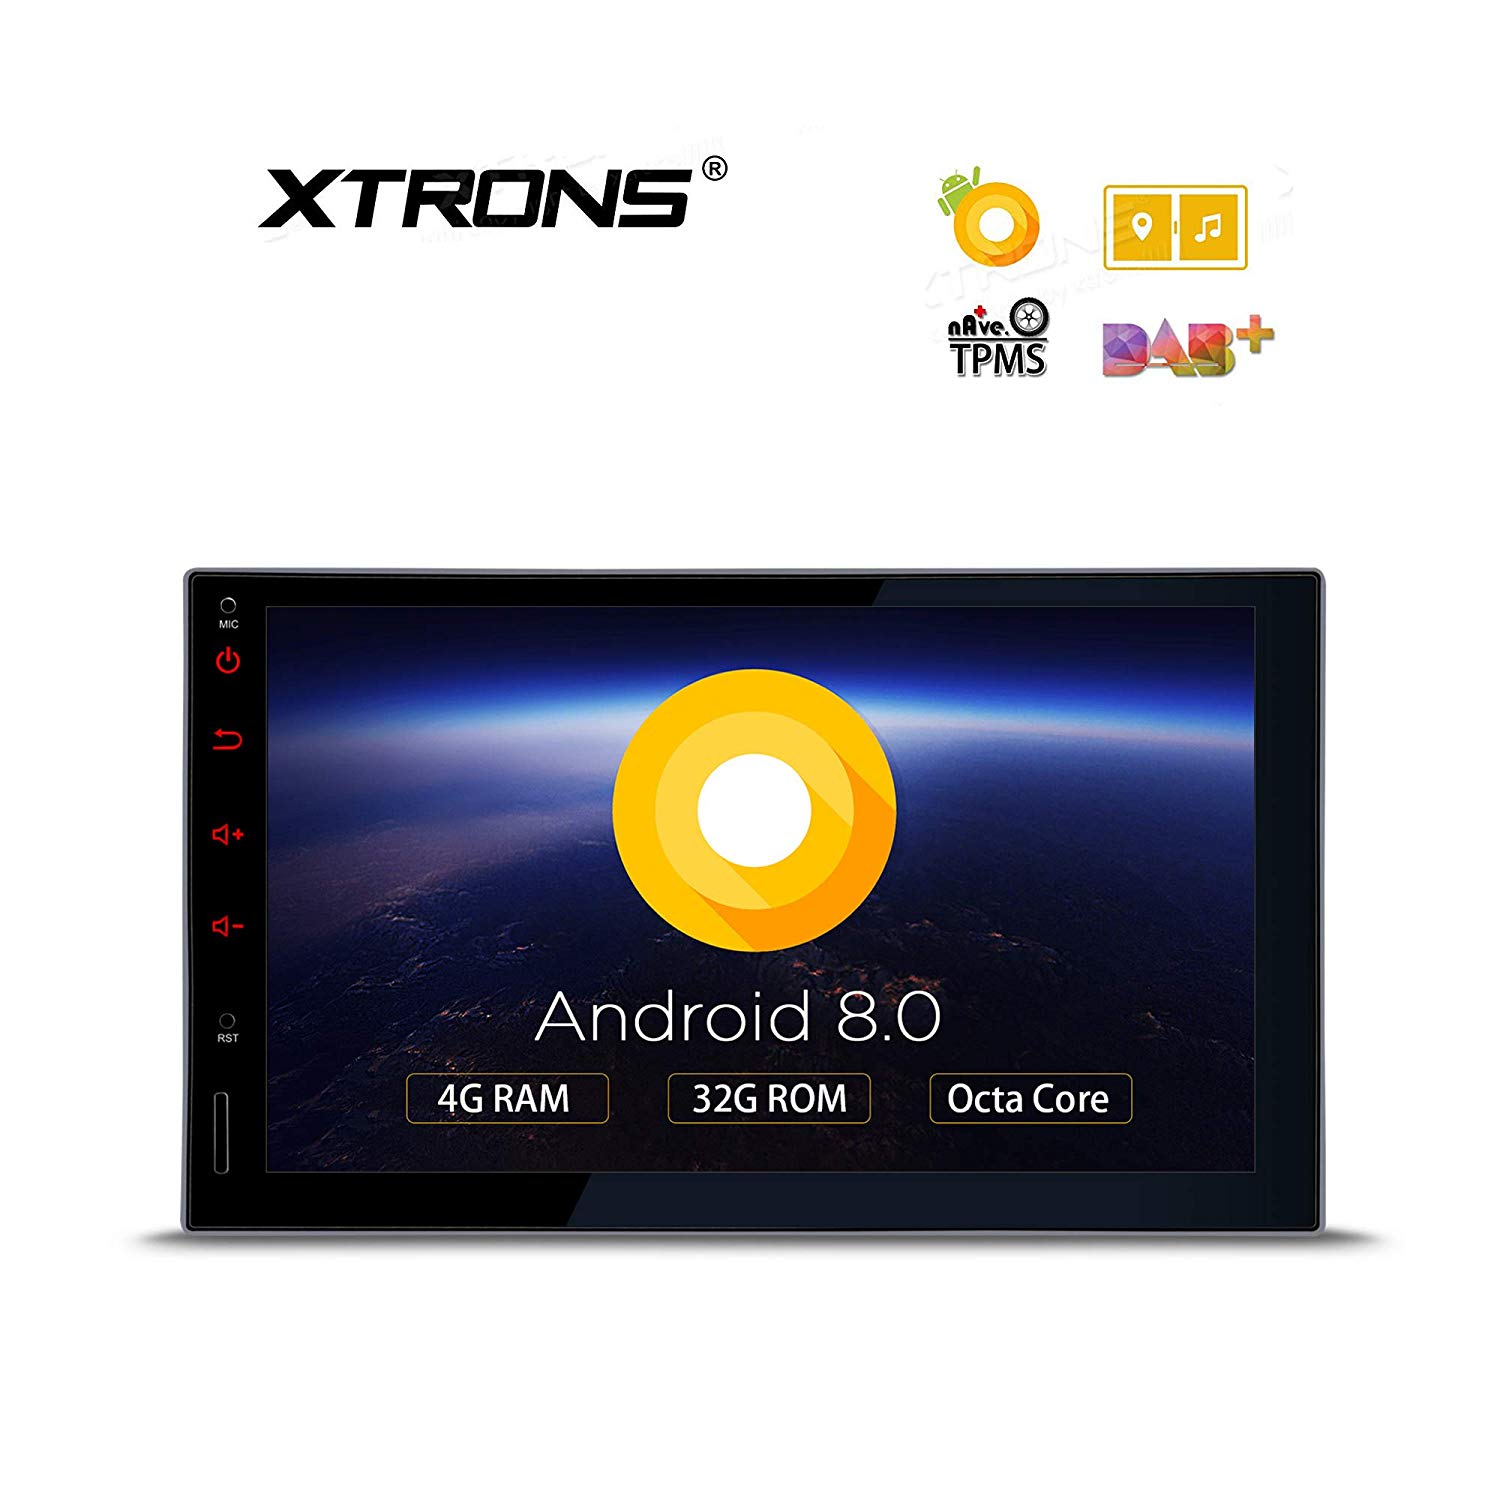 XTRONS 7 Inch Android 8.0 Octa Core 4G RAM 32G ROM Digital Multi-Touch Screen Car Stereo GPS Radio OBD2 TPMS Double 2 Din with Reversing Camera